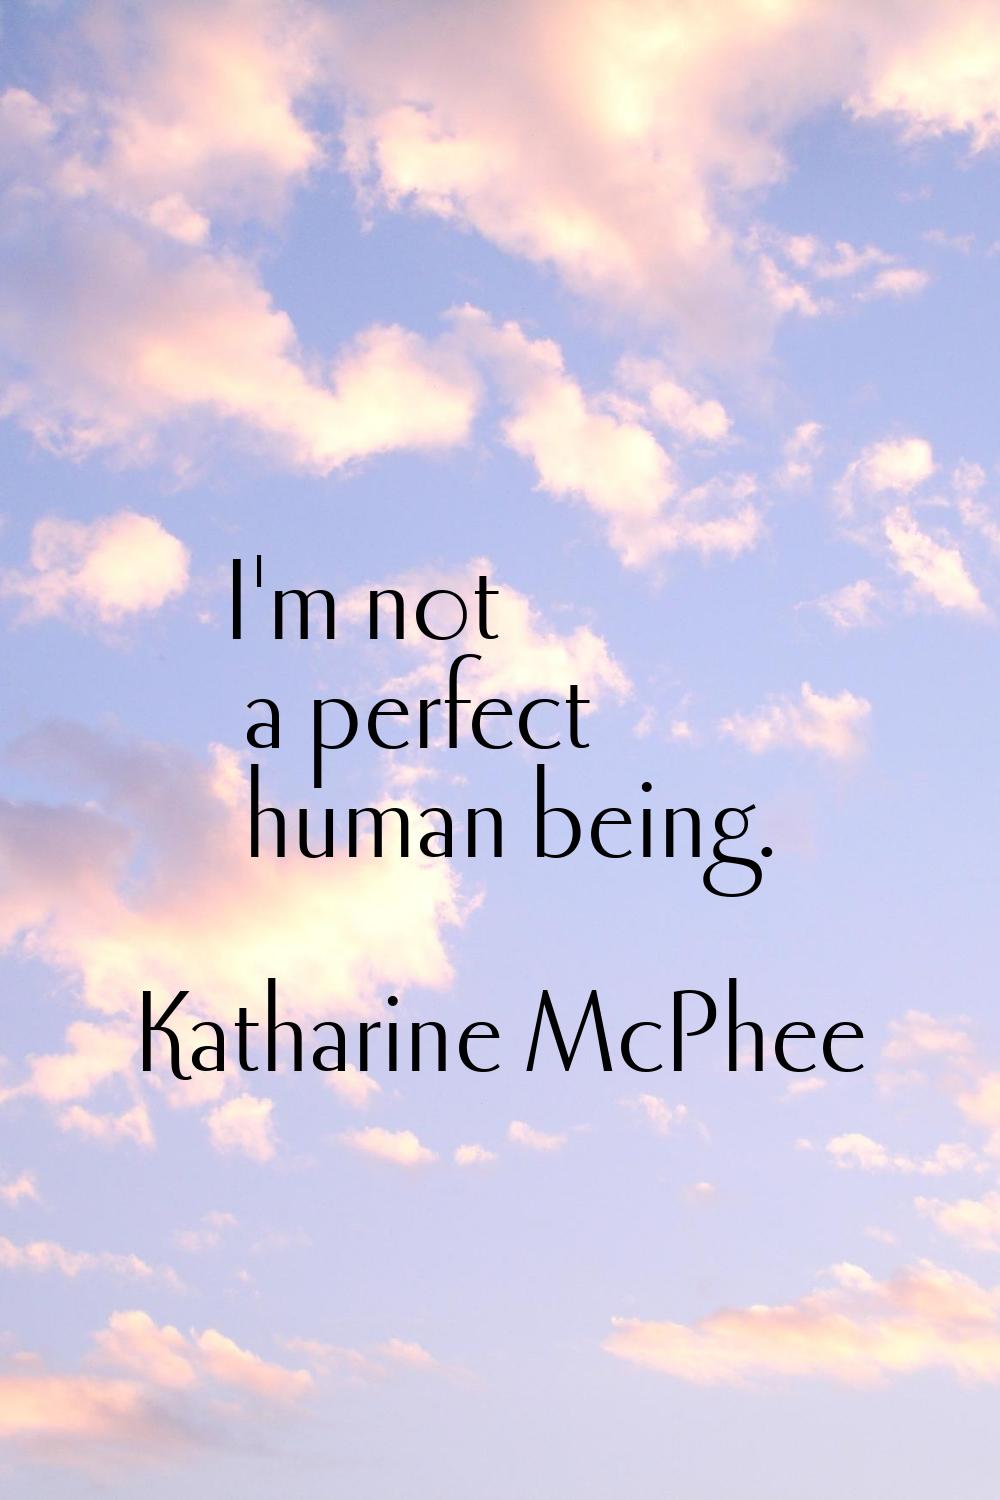 I'm not a perfect human being.